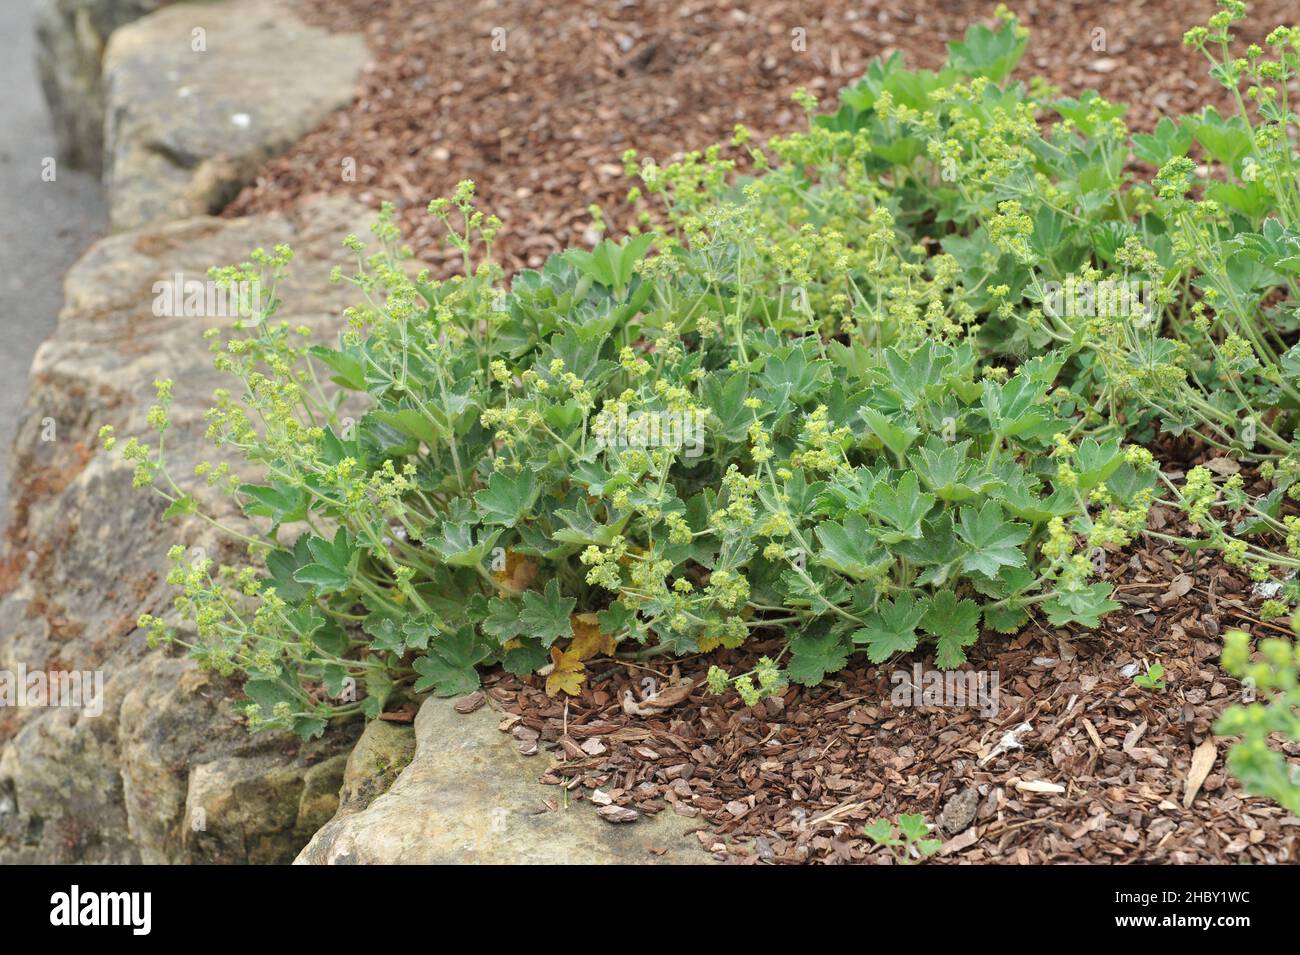 Lapeyrous' lady's mantle (Alchemilla lapeyrousii) blooms in a garden in May Stock Photo